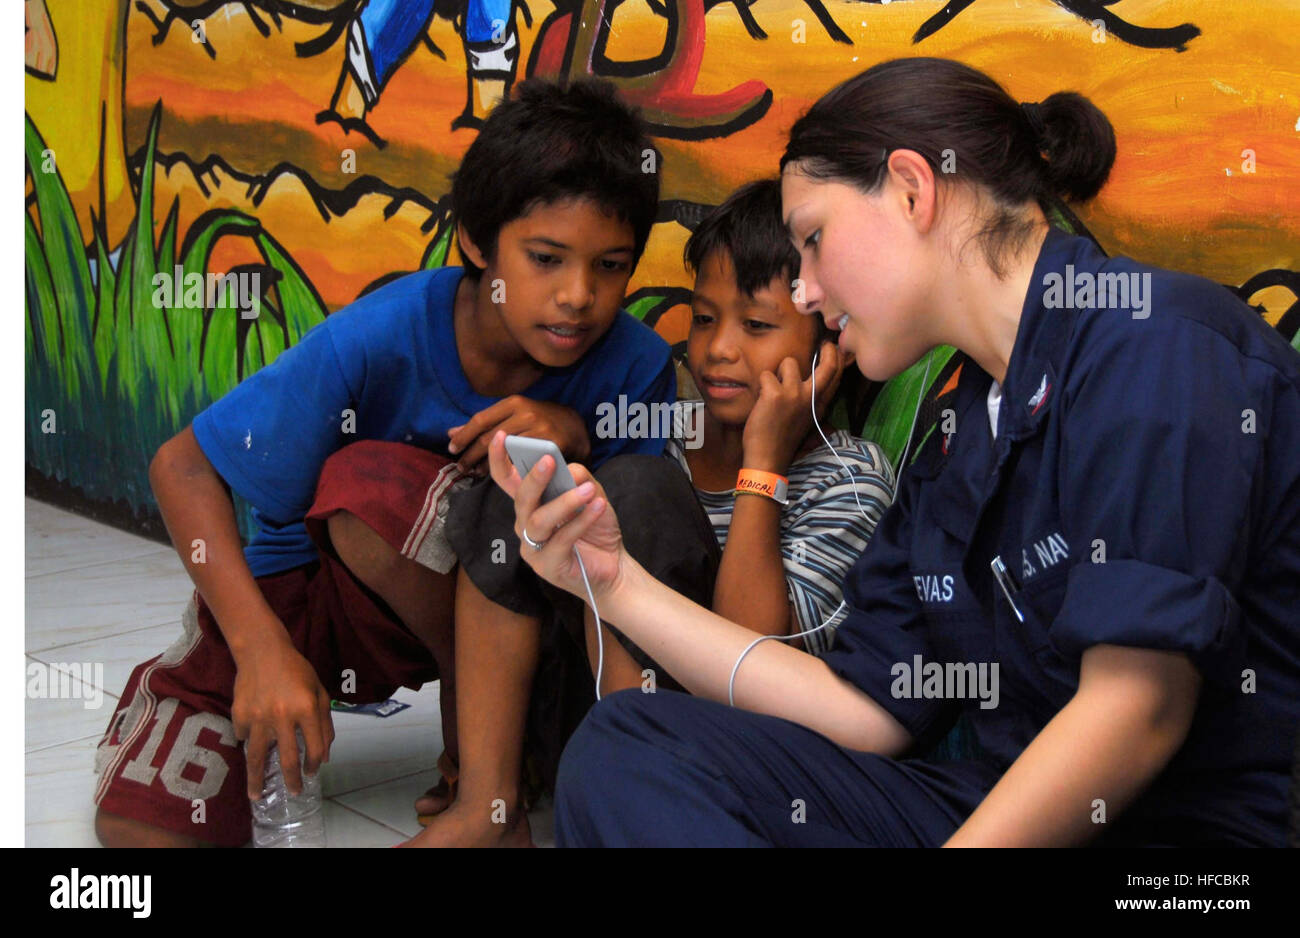 080531-N-9689V-003 PHILIPPINES (May 31, 2008) Information Systems Technician 3rd Class Thania Cuevas, assigned to the Military Sealift Command USNS Mercy (T-AH 19), shares music on her iPod with Filipino children at a Medical Civil Action Program site at the Cotabato City Central Pilot School supporting Pacific Partnership 2008. U.S. Navy photo by Mass Communication Specialist 3rd Class Joshua Valcarcel (Released) Medical Civil Action Program in The Philippines 93737 Stock Photo